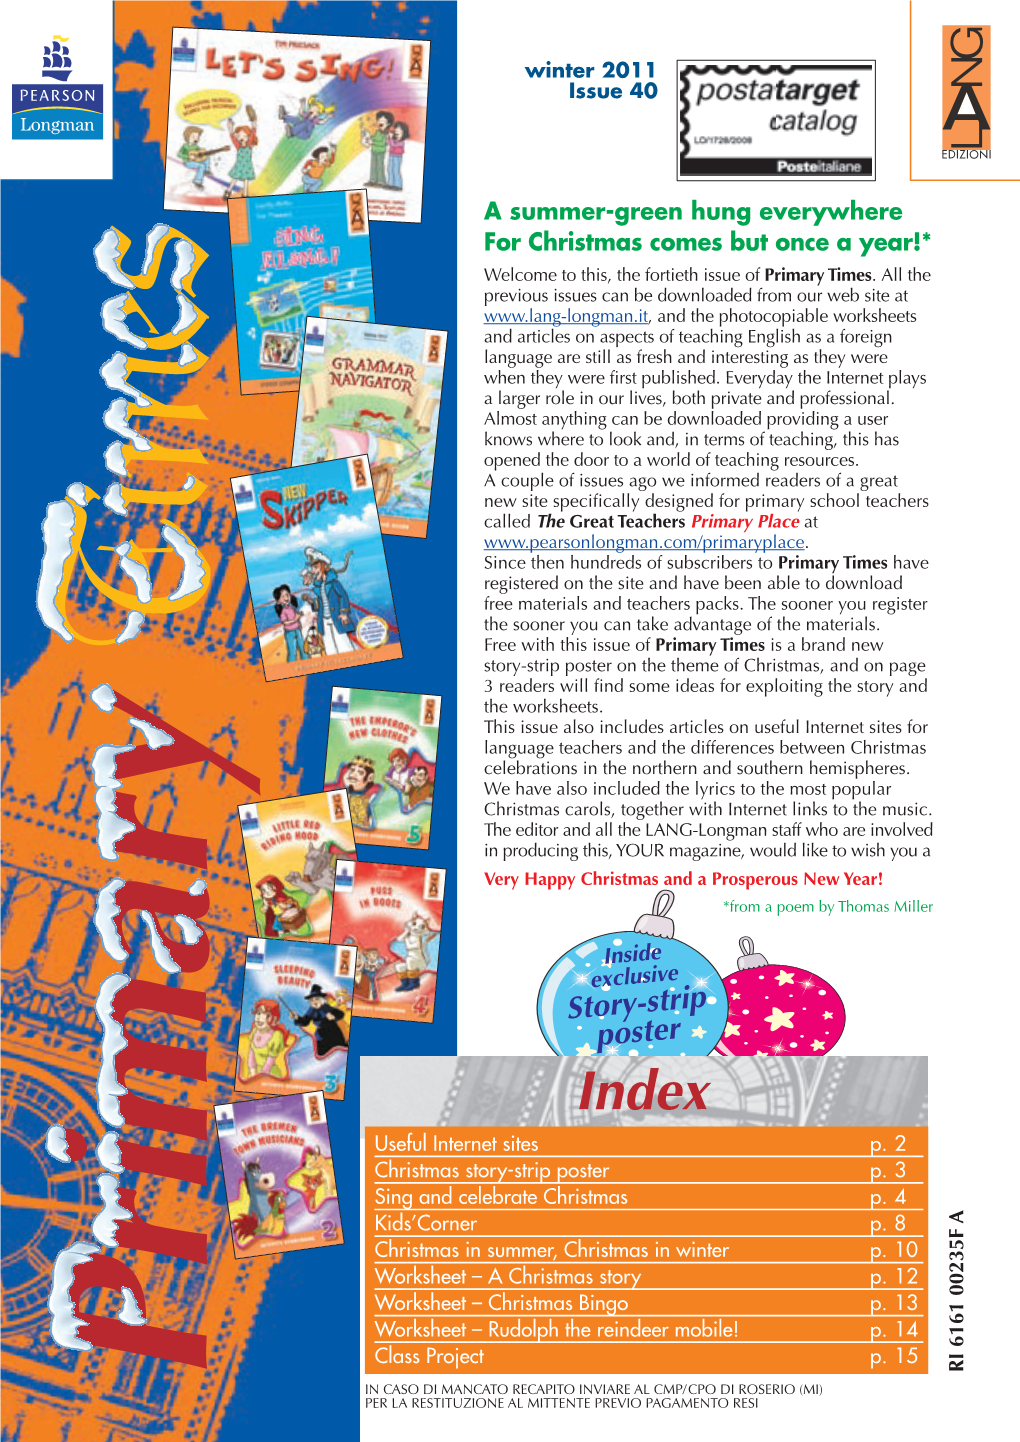 Story-Strip Poster on the Theme of Christmas, and on Page 3 Readers Will Find Some Ideas for Exploiting the Story and the Worksheets